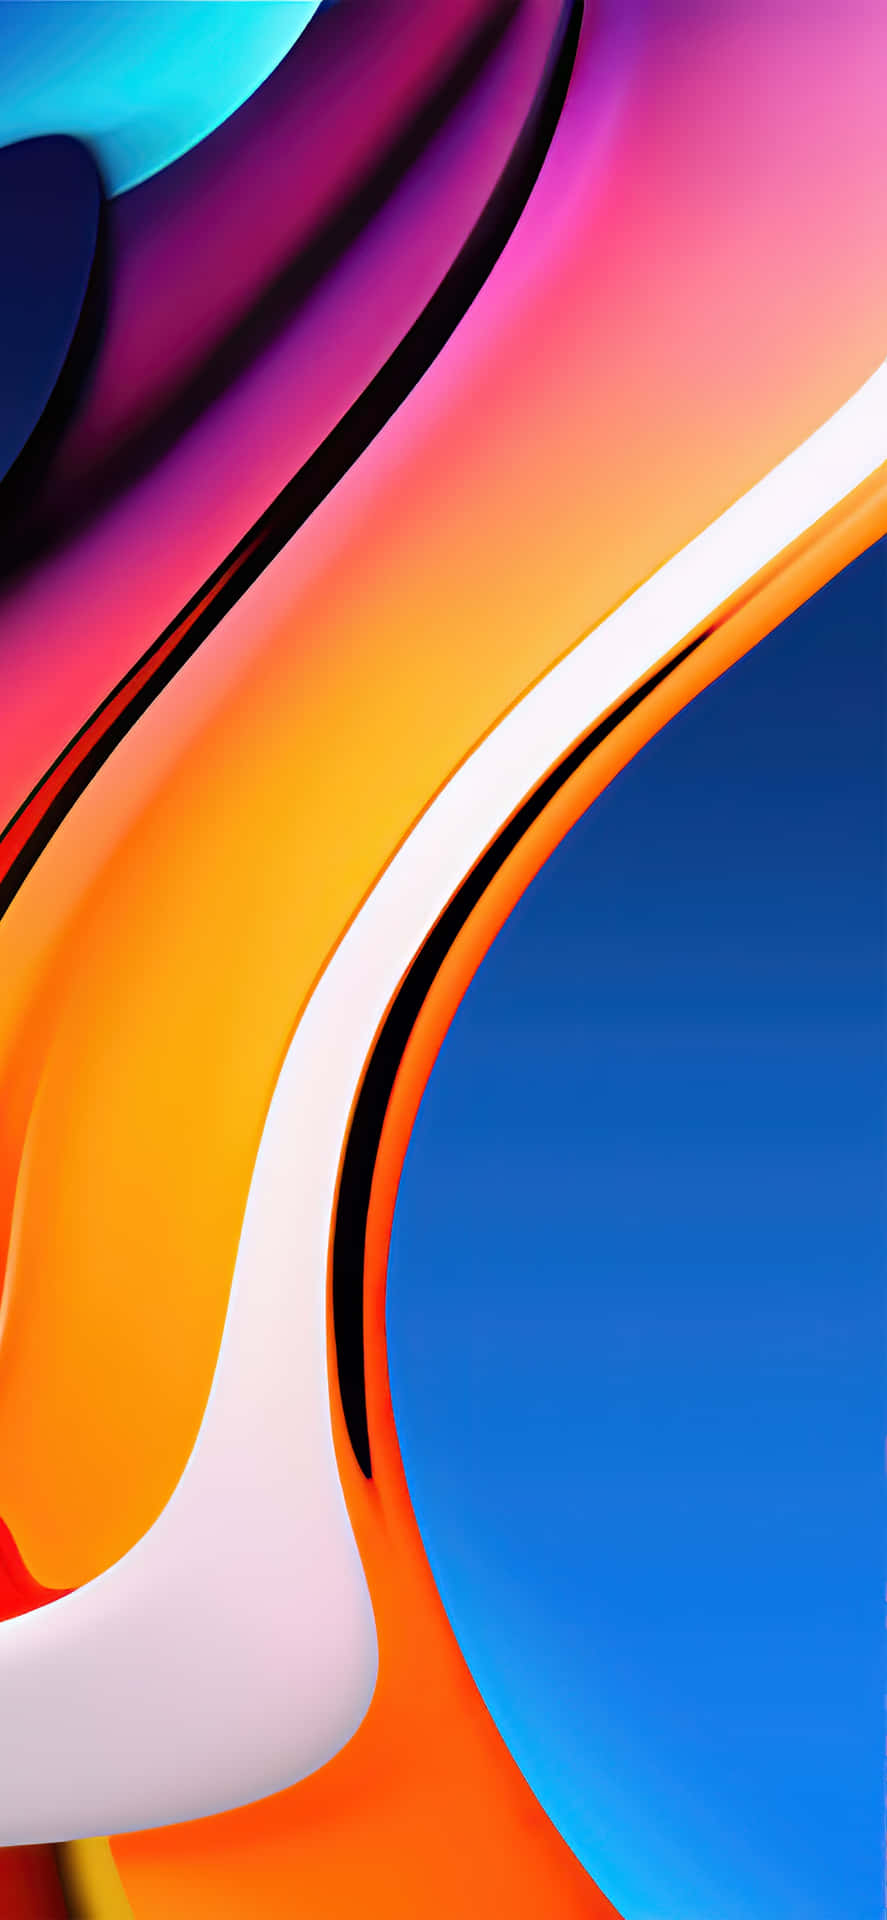 Clarity and Sharpness of Retina Display Wallpaper